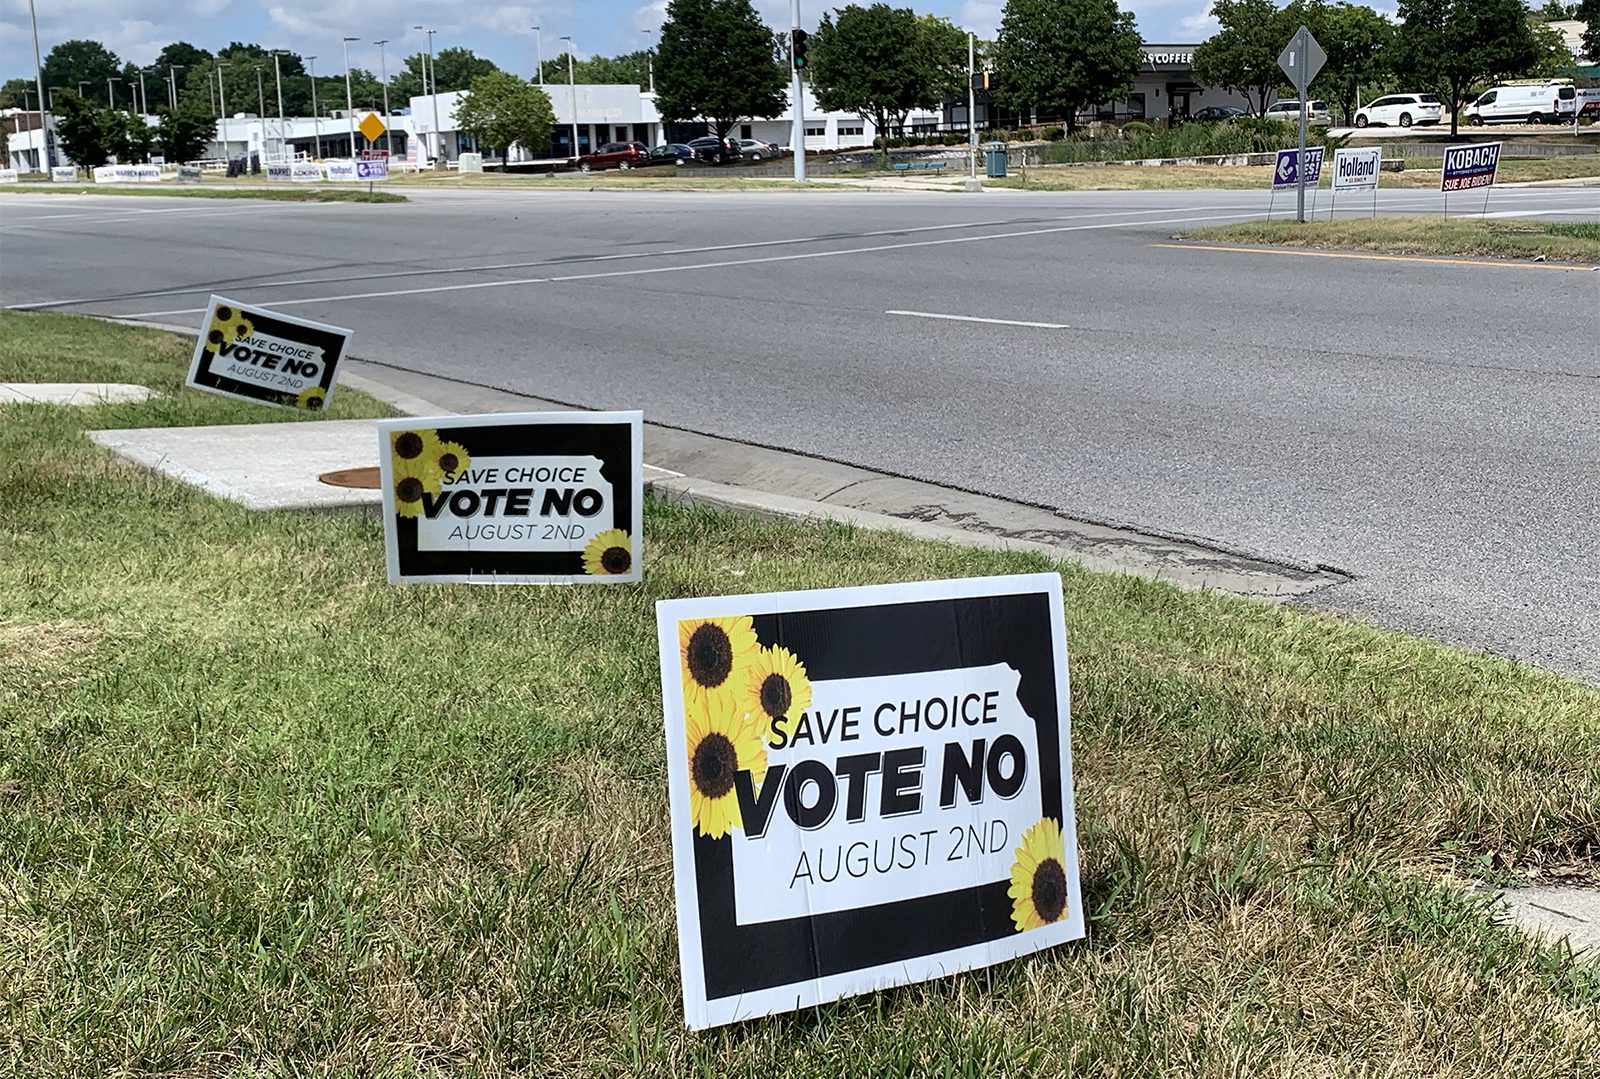 Election signs line streets near a polling location in Overland Park, Kansas, Wednesday, July 27, 2022. RNS photo by Kit Doyle